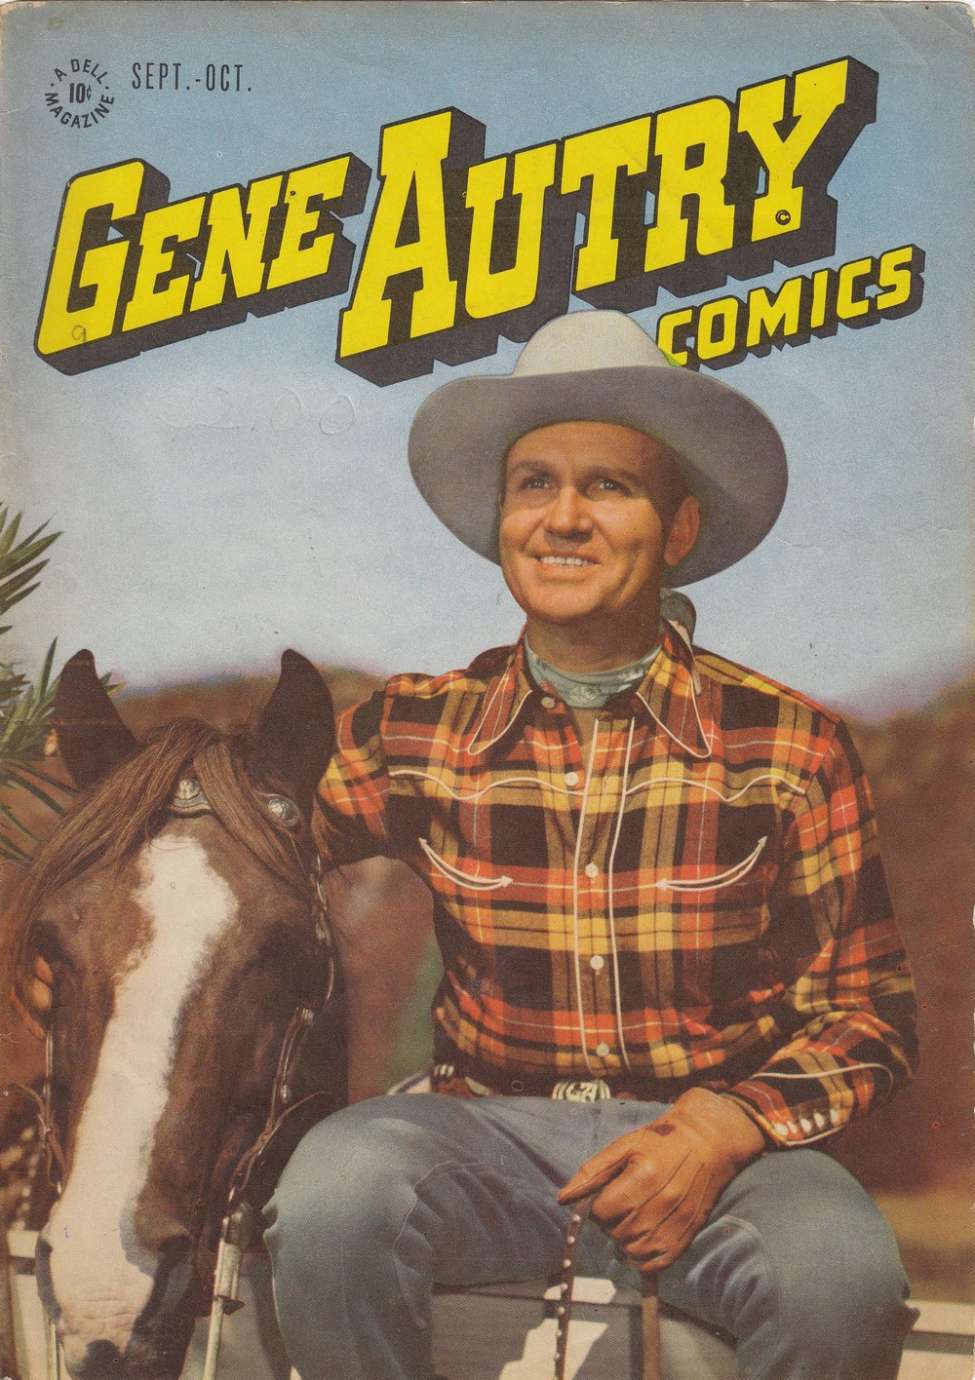 Book Cover For Gene Autry Comics 9